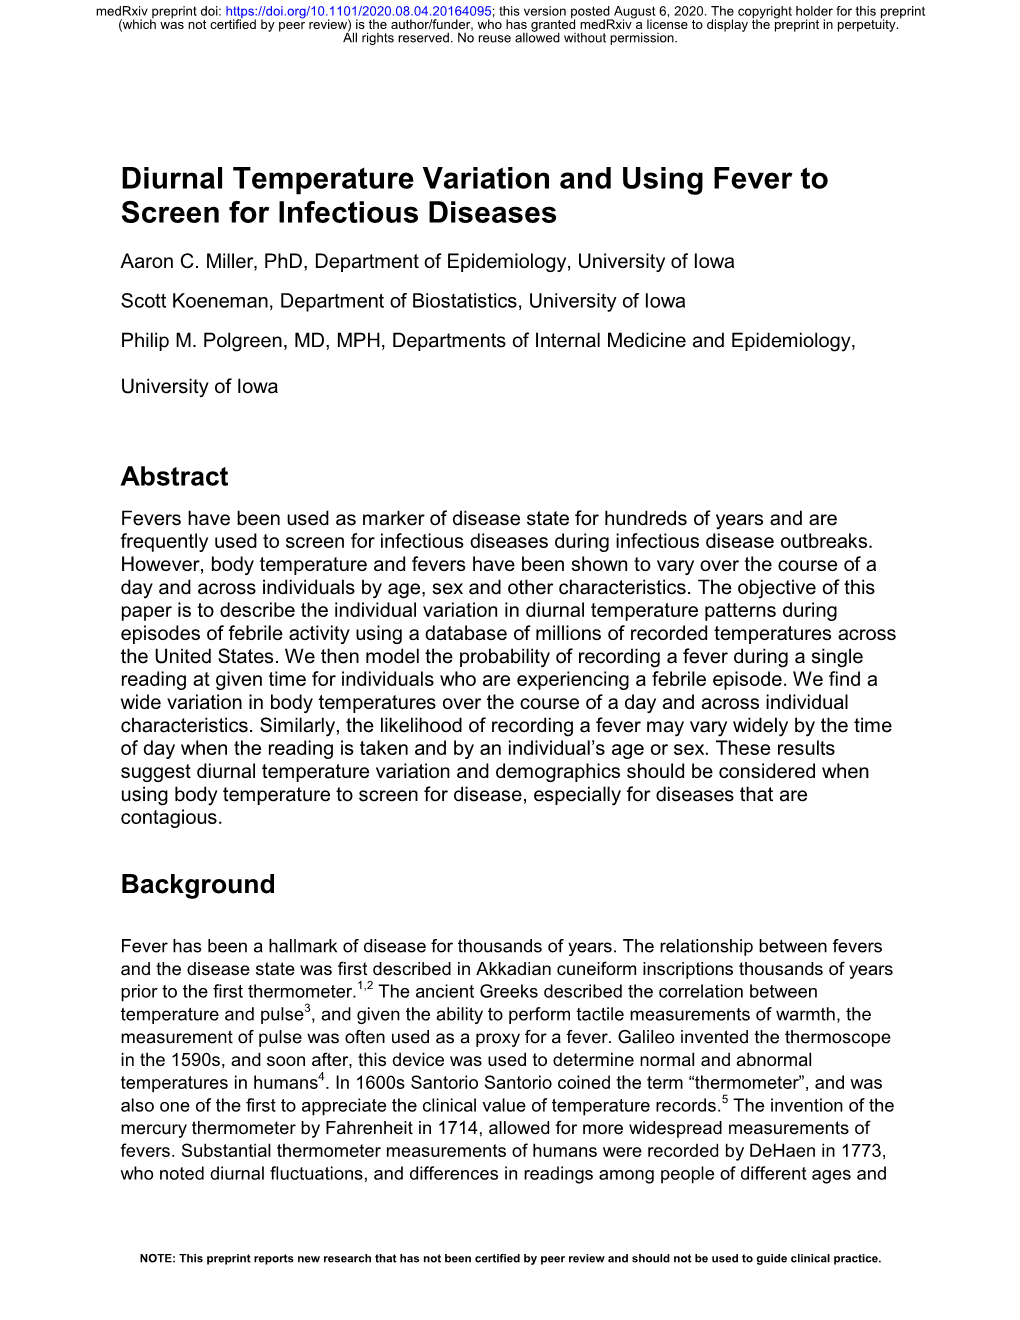 Diurnal Temperature Variation and Using Fever to Screen for Infectious Diseases